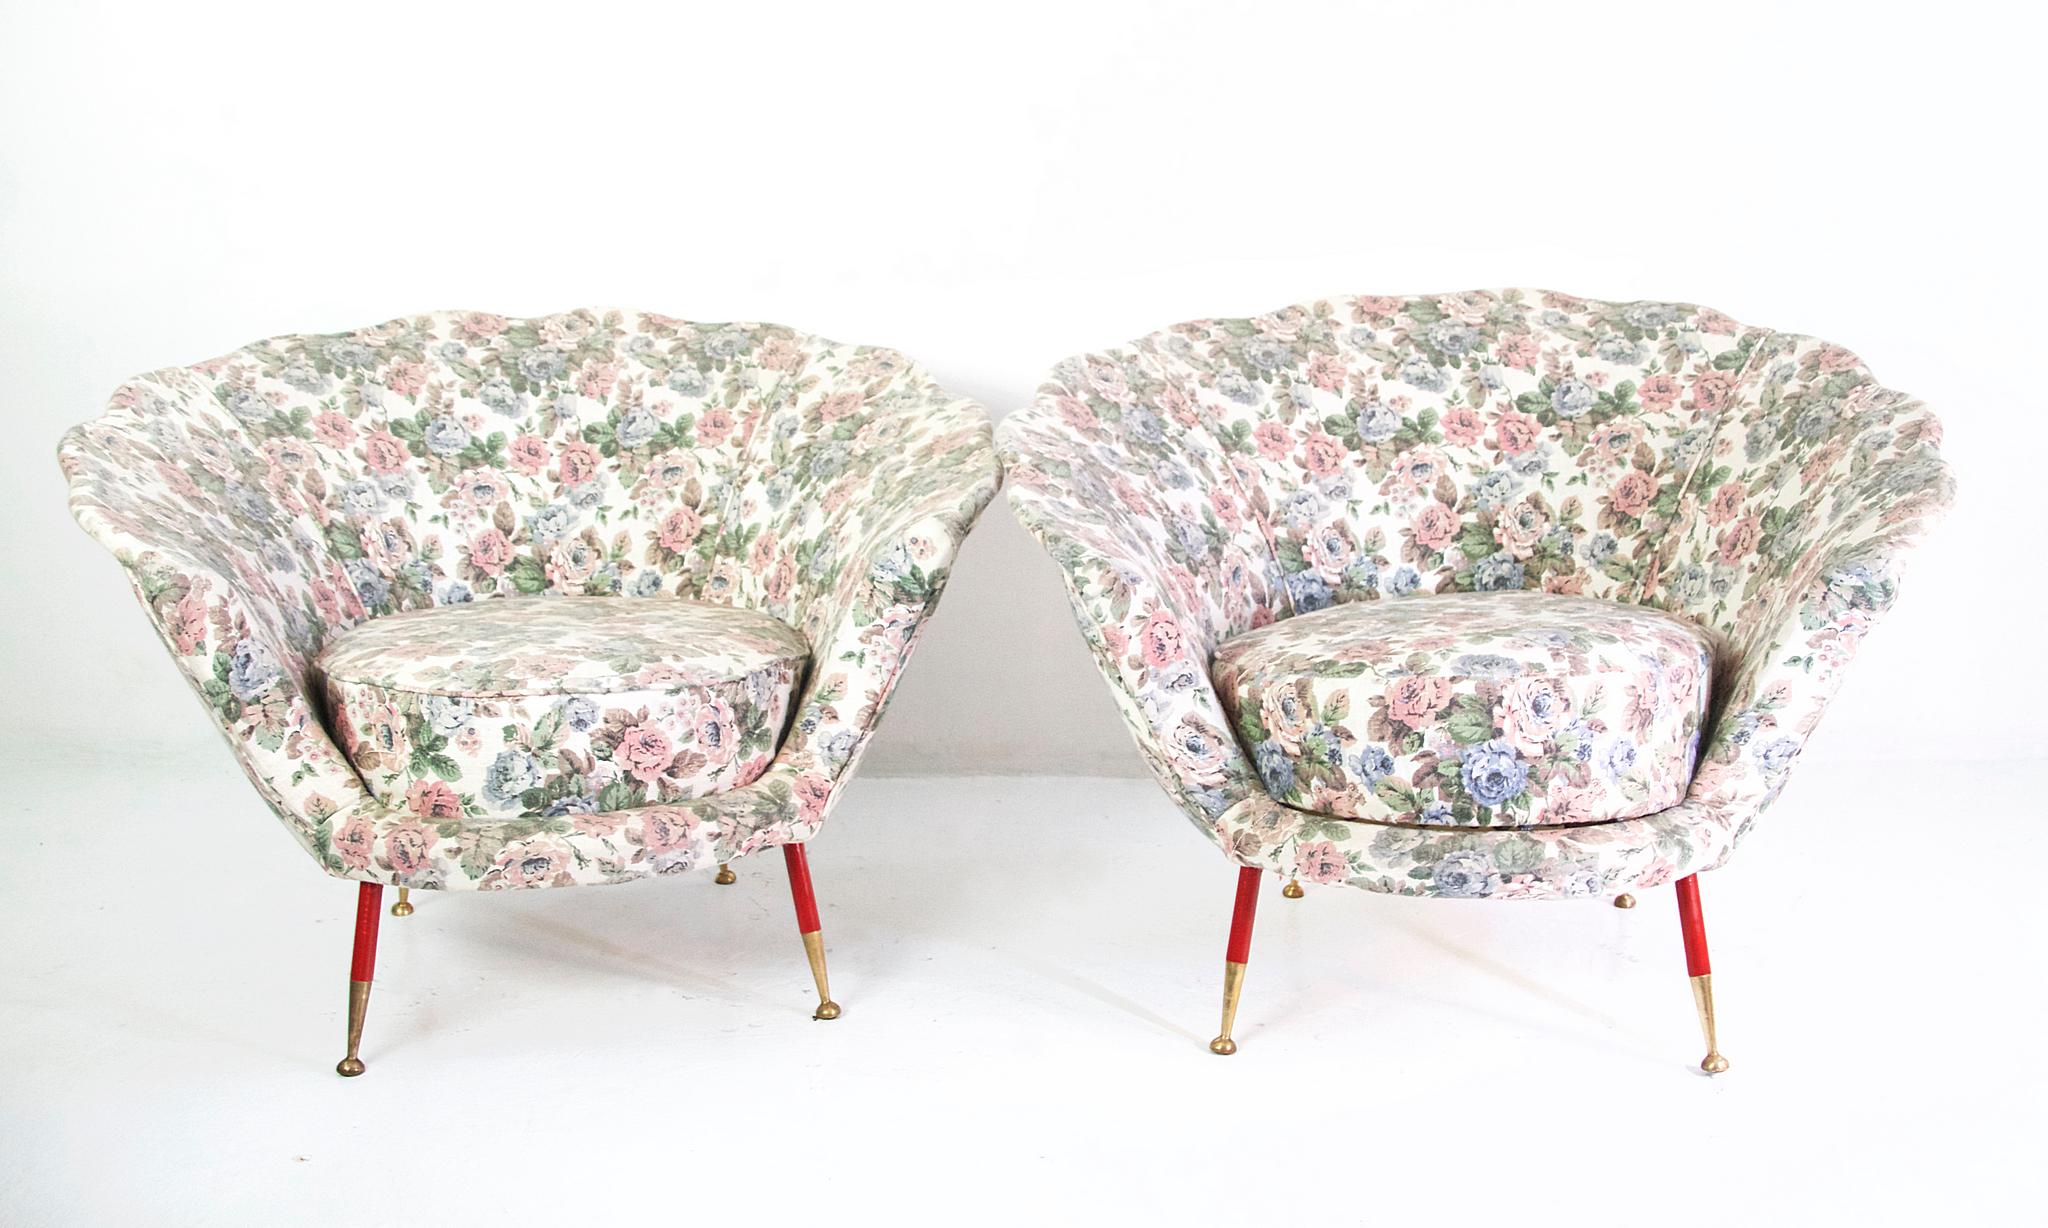 Pair of Midcentury Italian Clam Shell Armchairs In Good Condition For Sale In Albano Laziale, Rome/Lazio